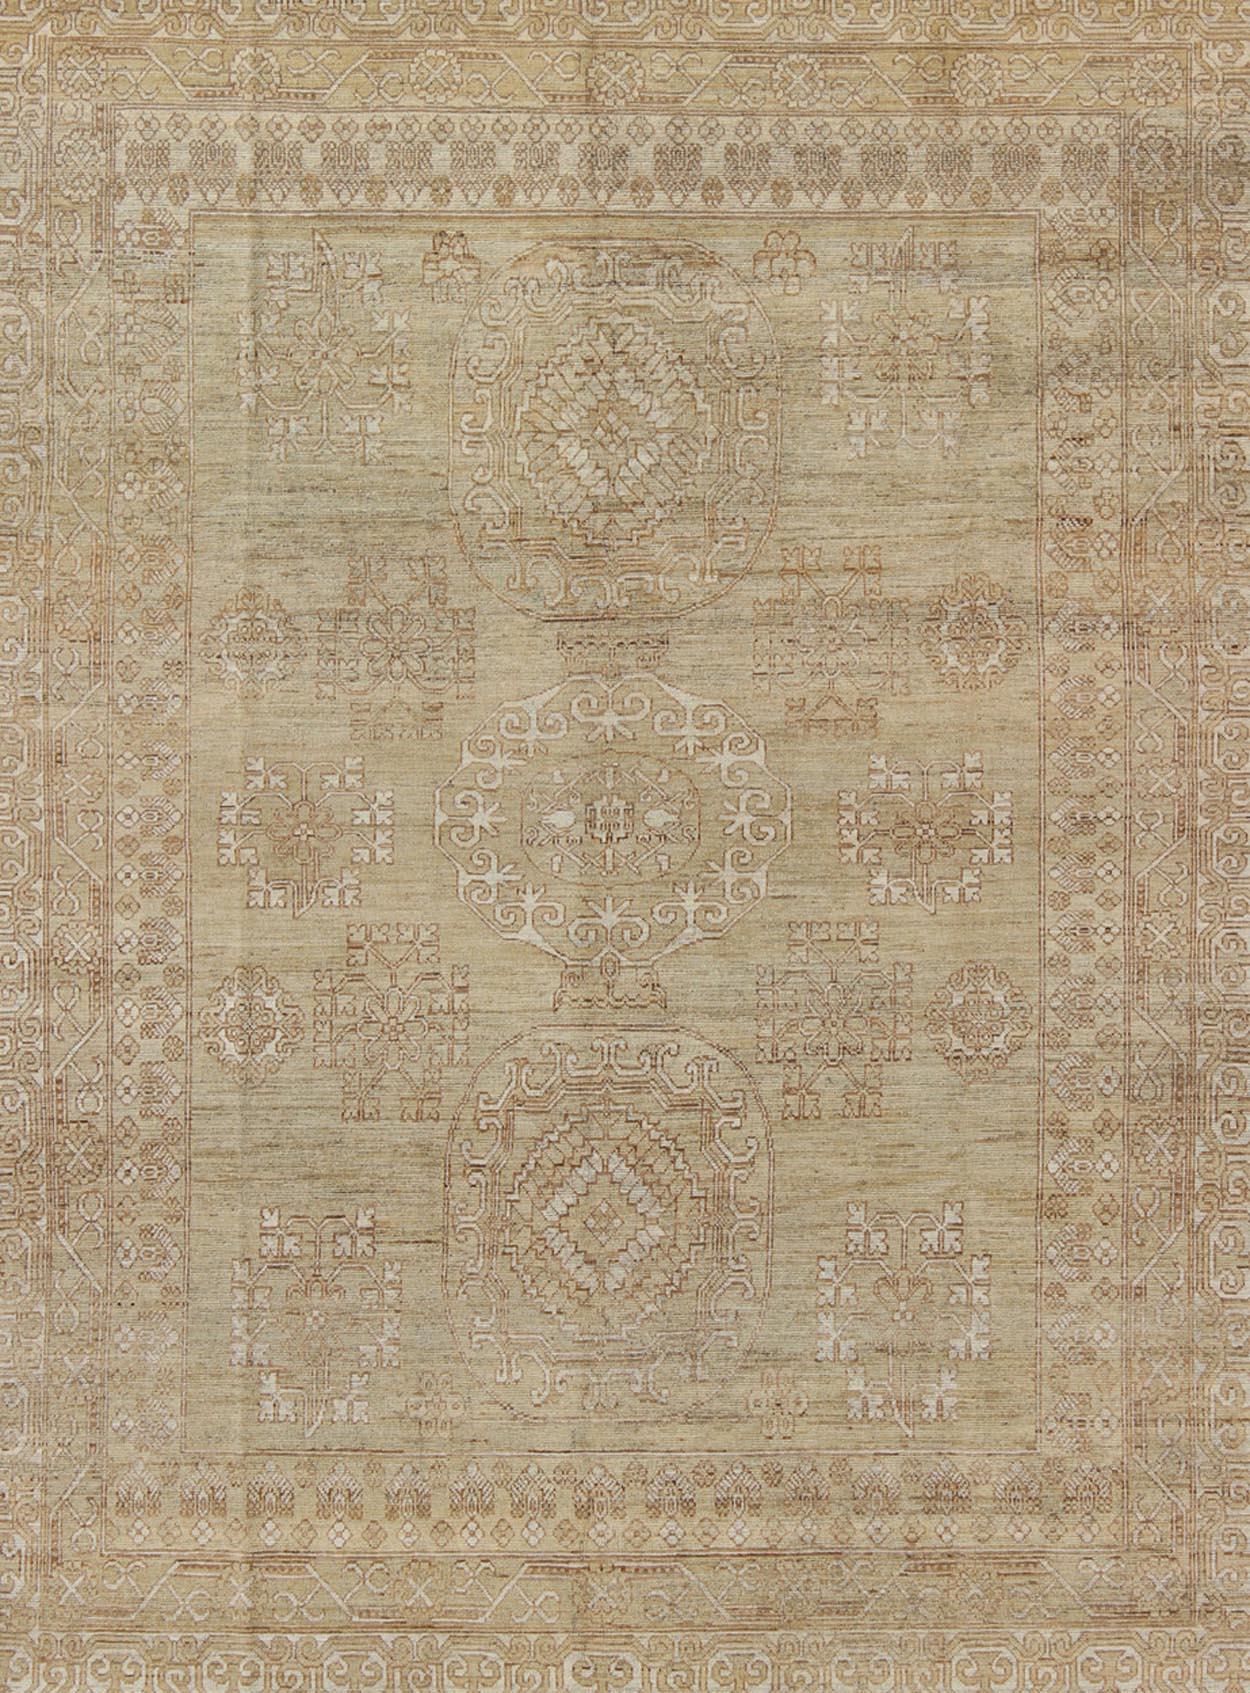 Khotan Design Rug with All-Over Geometric Pattern in Light Brown and Green's. Keivan Woven Arts / rug MP-1409-1446 country of origin / type: Afghanistan / Khotan.
Measures: 8'6 x 10'4
This Khotan features a geometric all-over design flanked by a